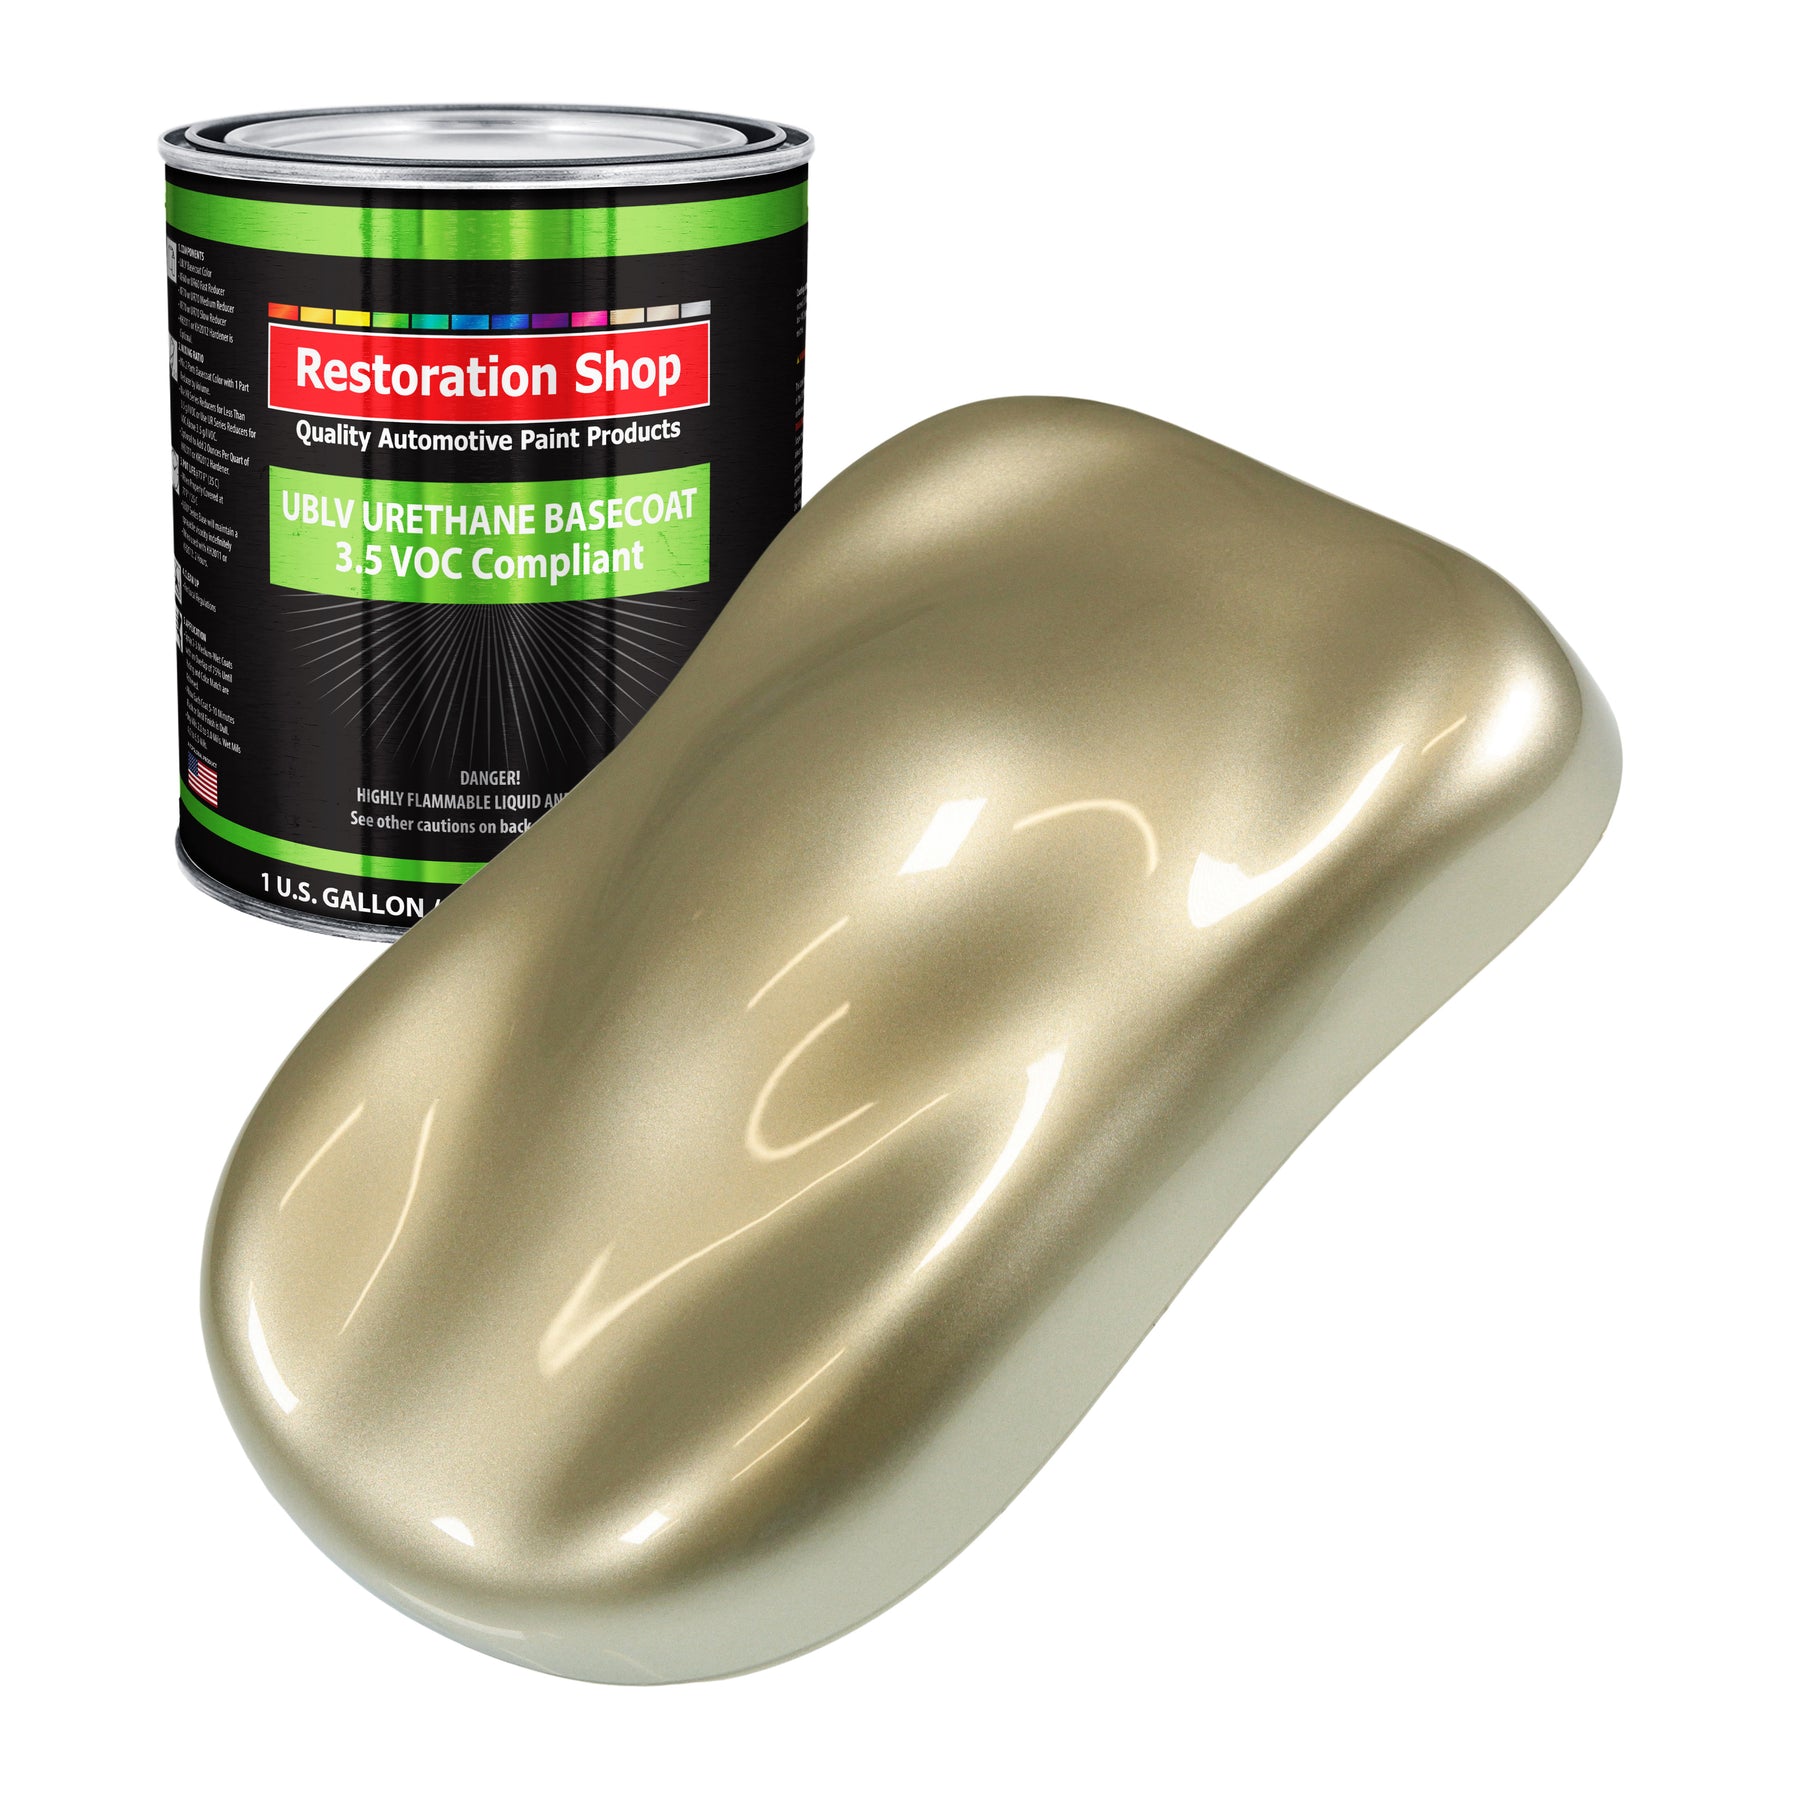 650 Medium Neutral Tan ColorBond LVP Refinisher for GM vehicles